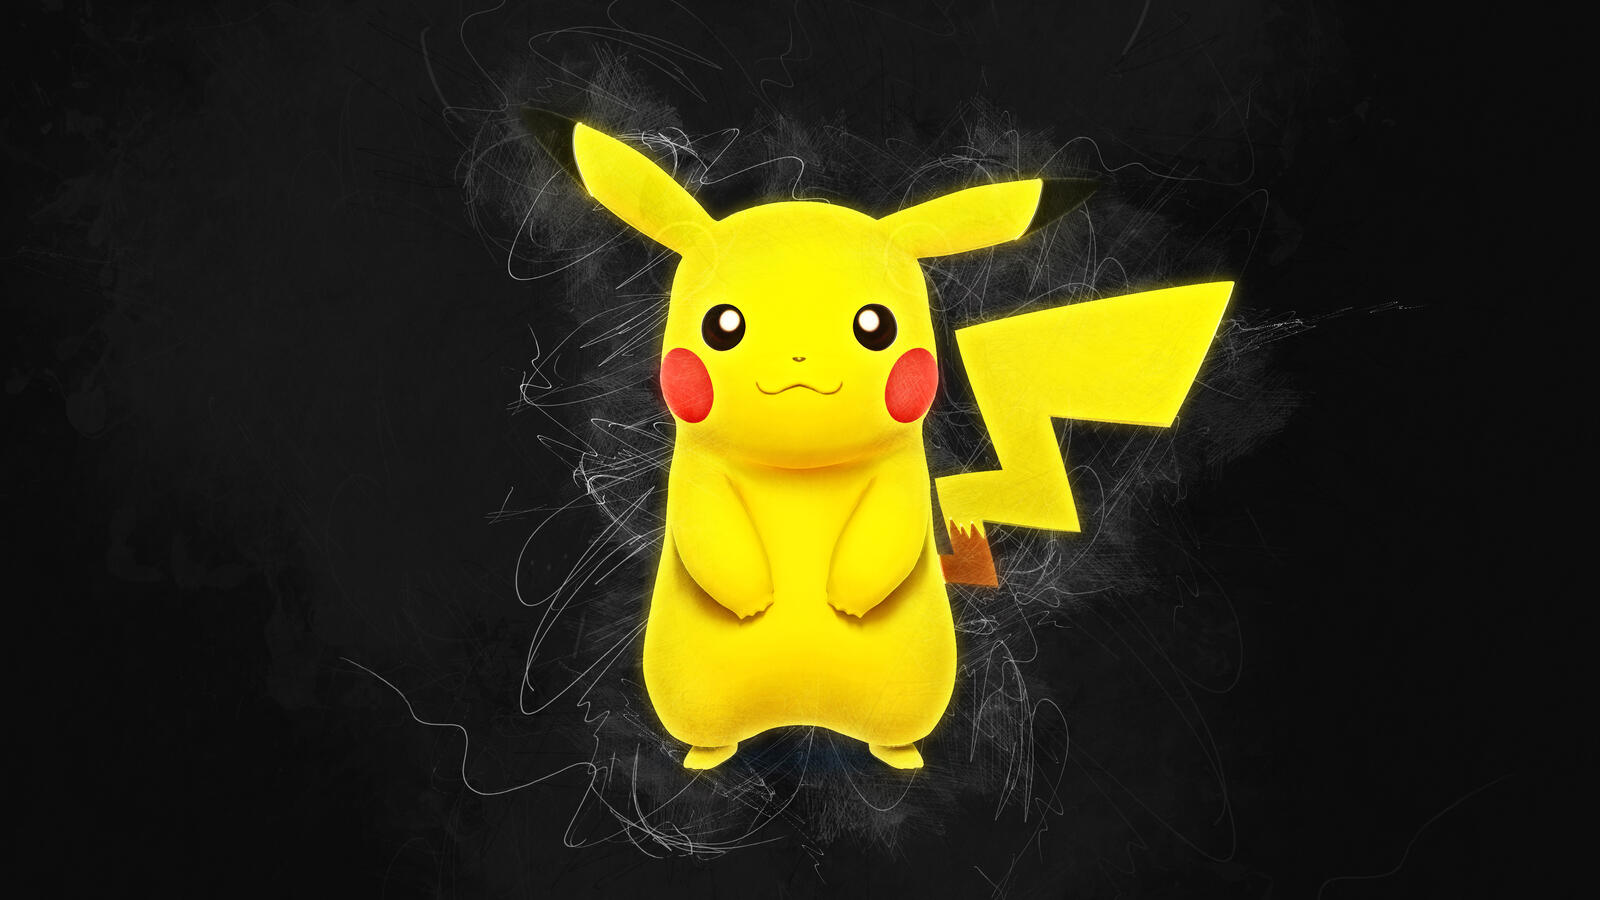 Free photo Wallpaper with pikachu on a black background